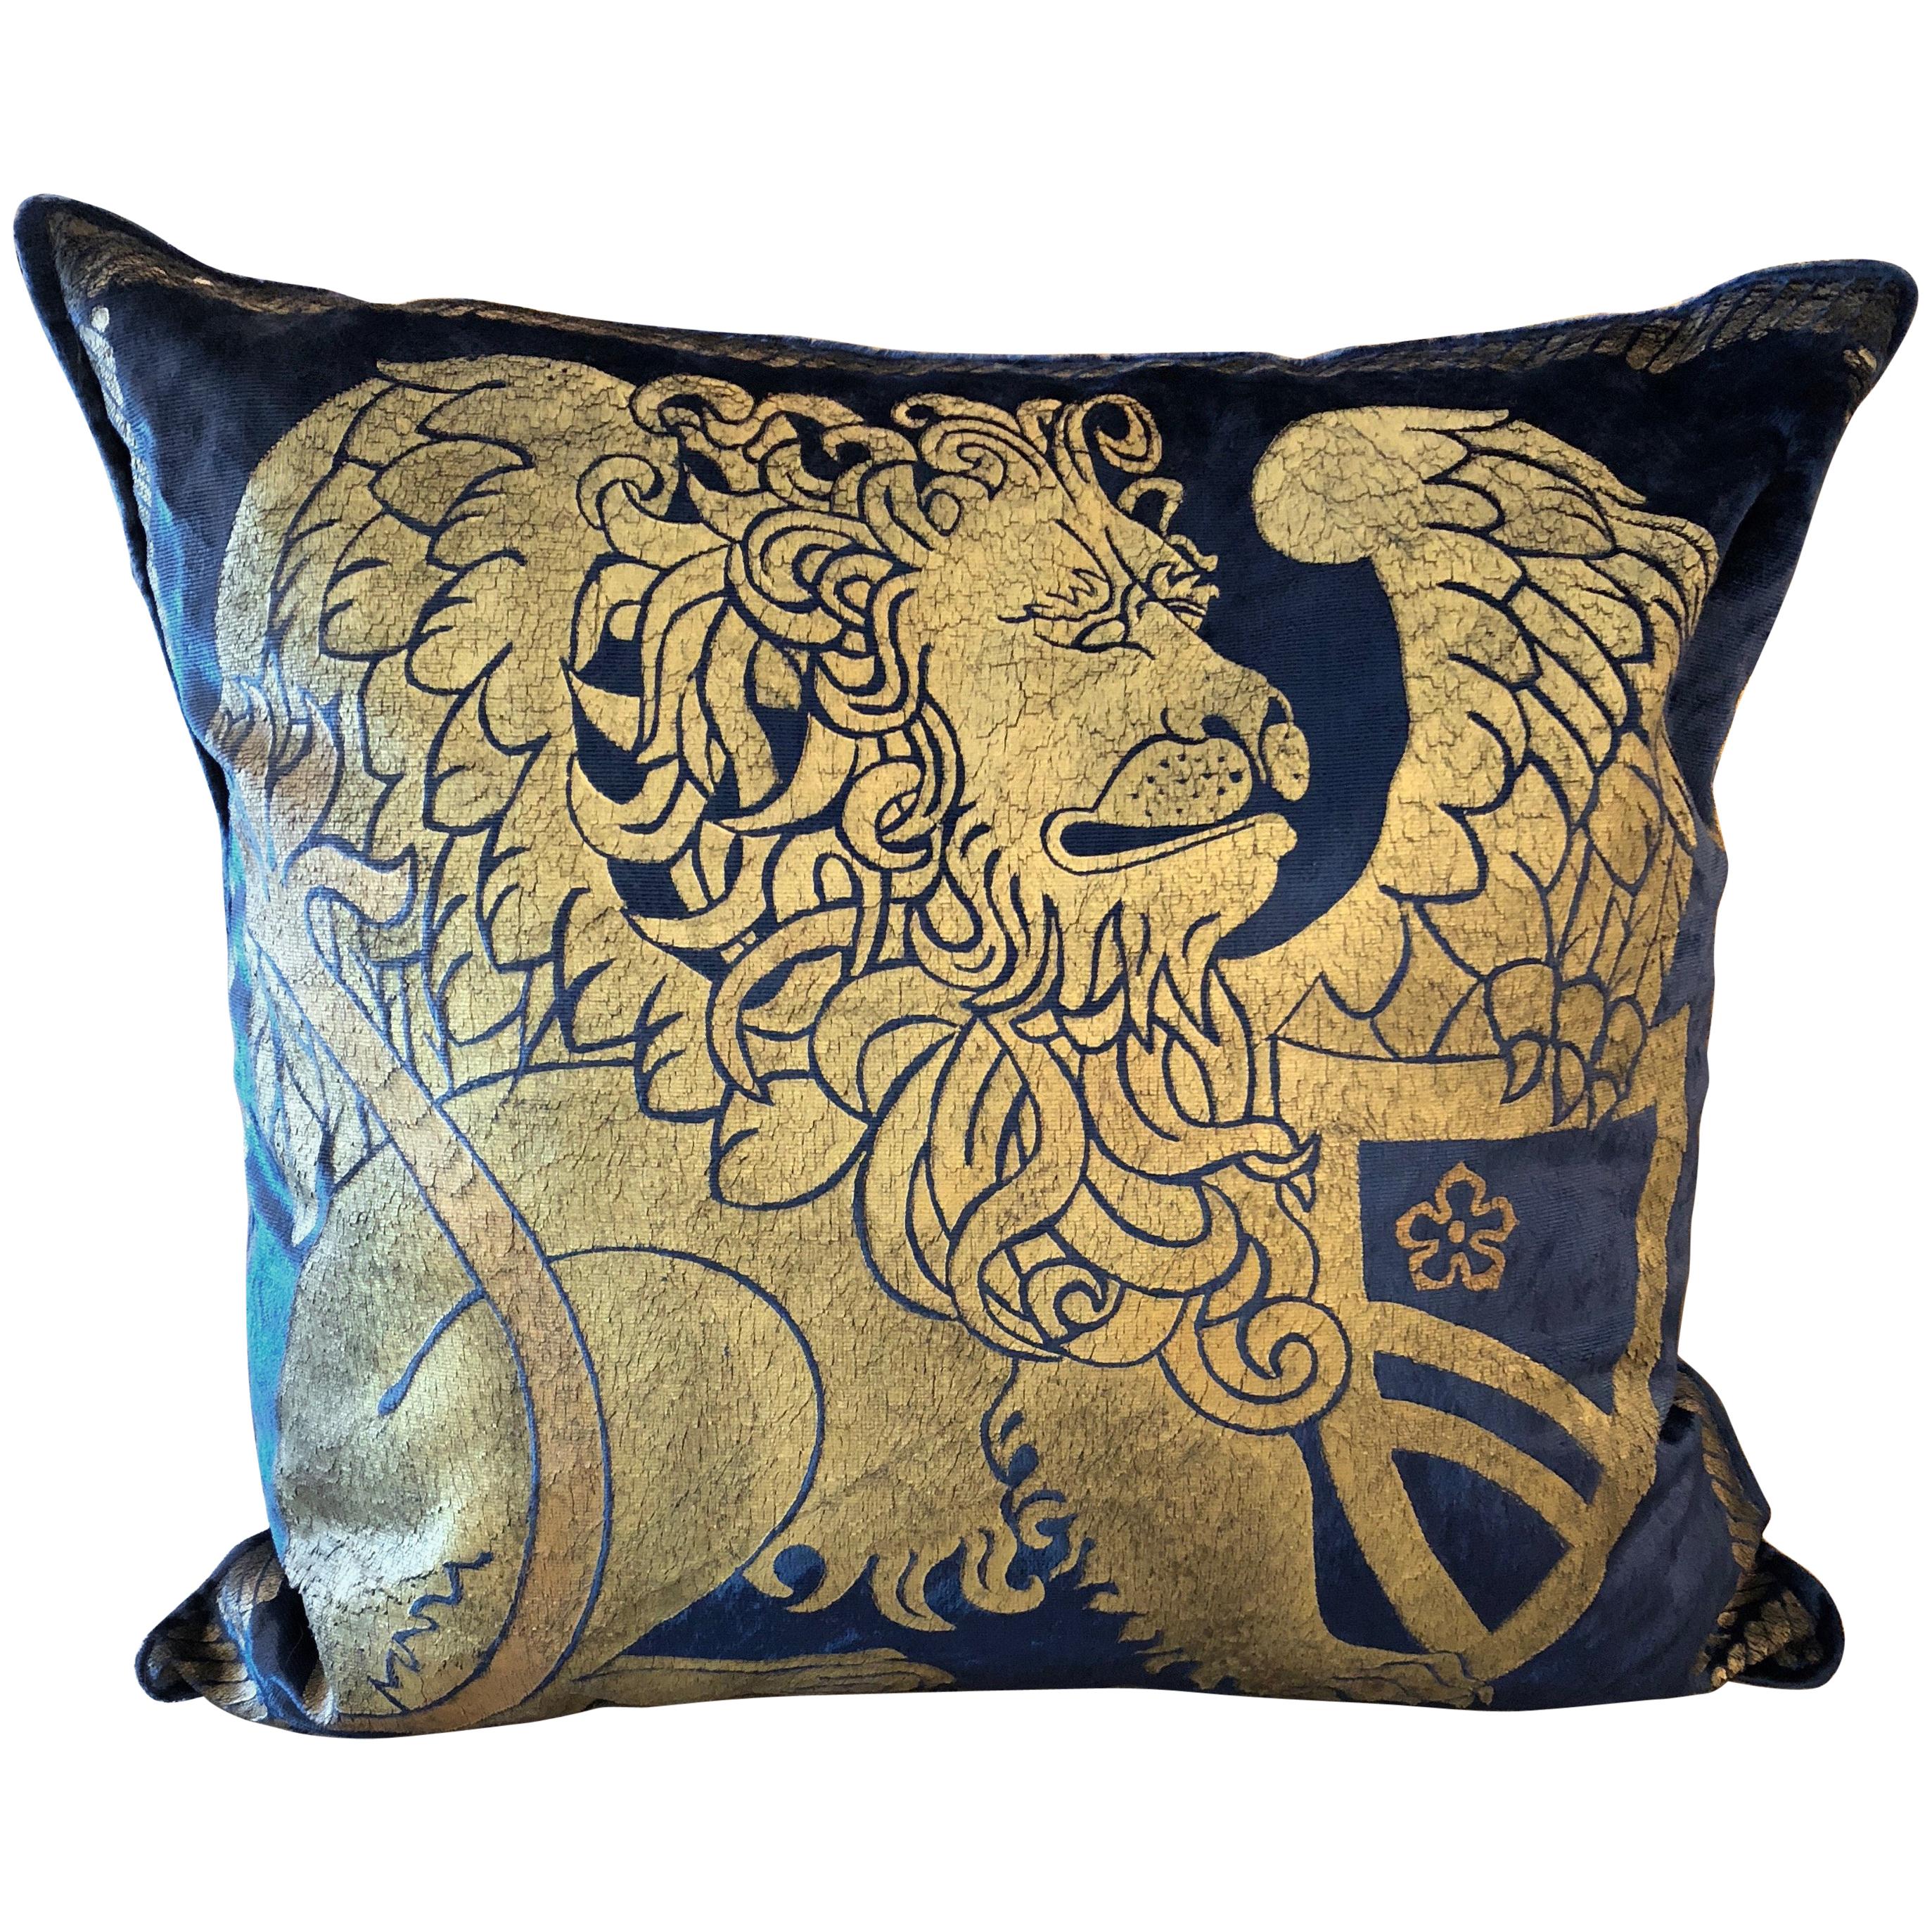 Sumptuous Venetian Bevilacqua Pillow in Midnight Blue and Gold